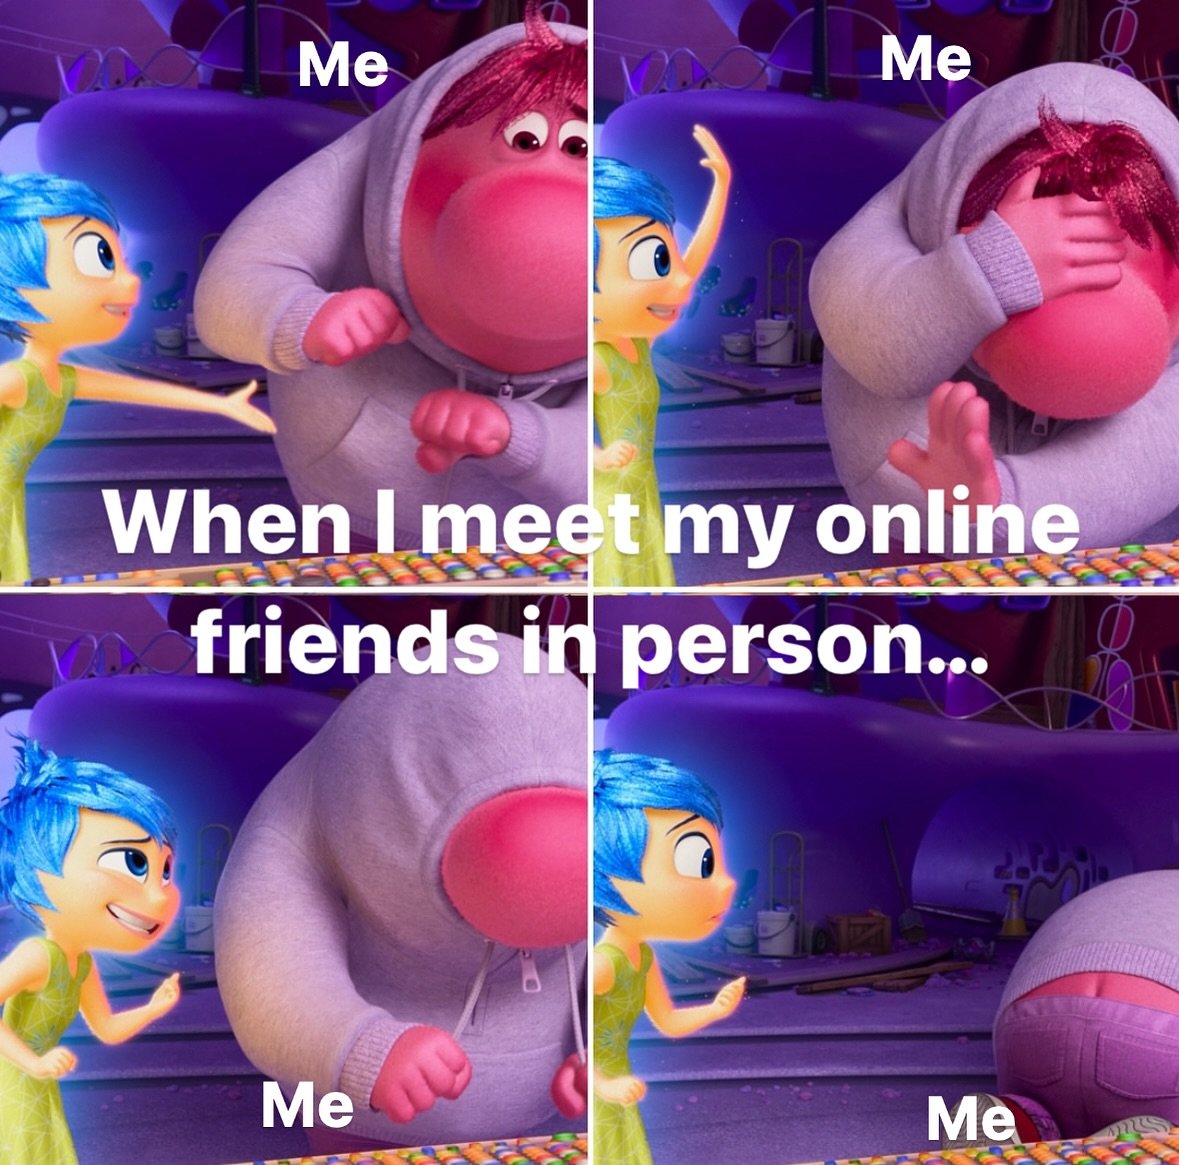 📸 @pixar I&rsquo;m not alone right 😂. I&rsquo;m ready to make more friends in person! Goodbye Introvert, hello extroverted introvert 😂 

Seriously can wait for this movie! 🎥 I have found shows and movies really help open the door 🚪 to conversati